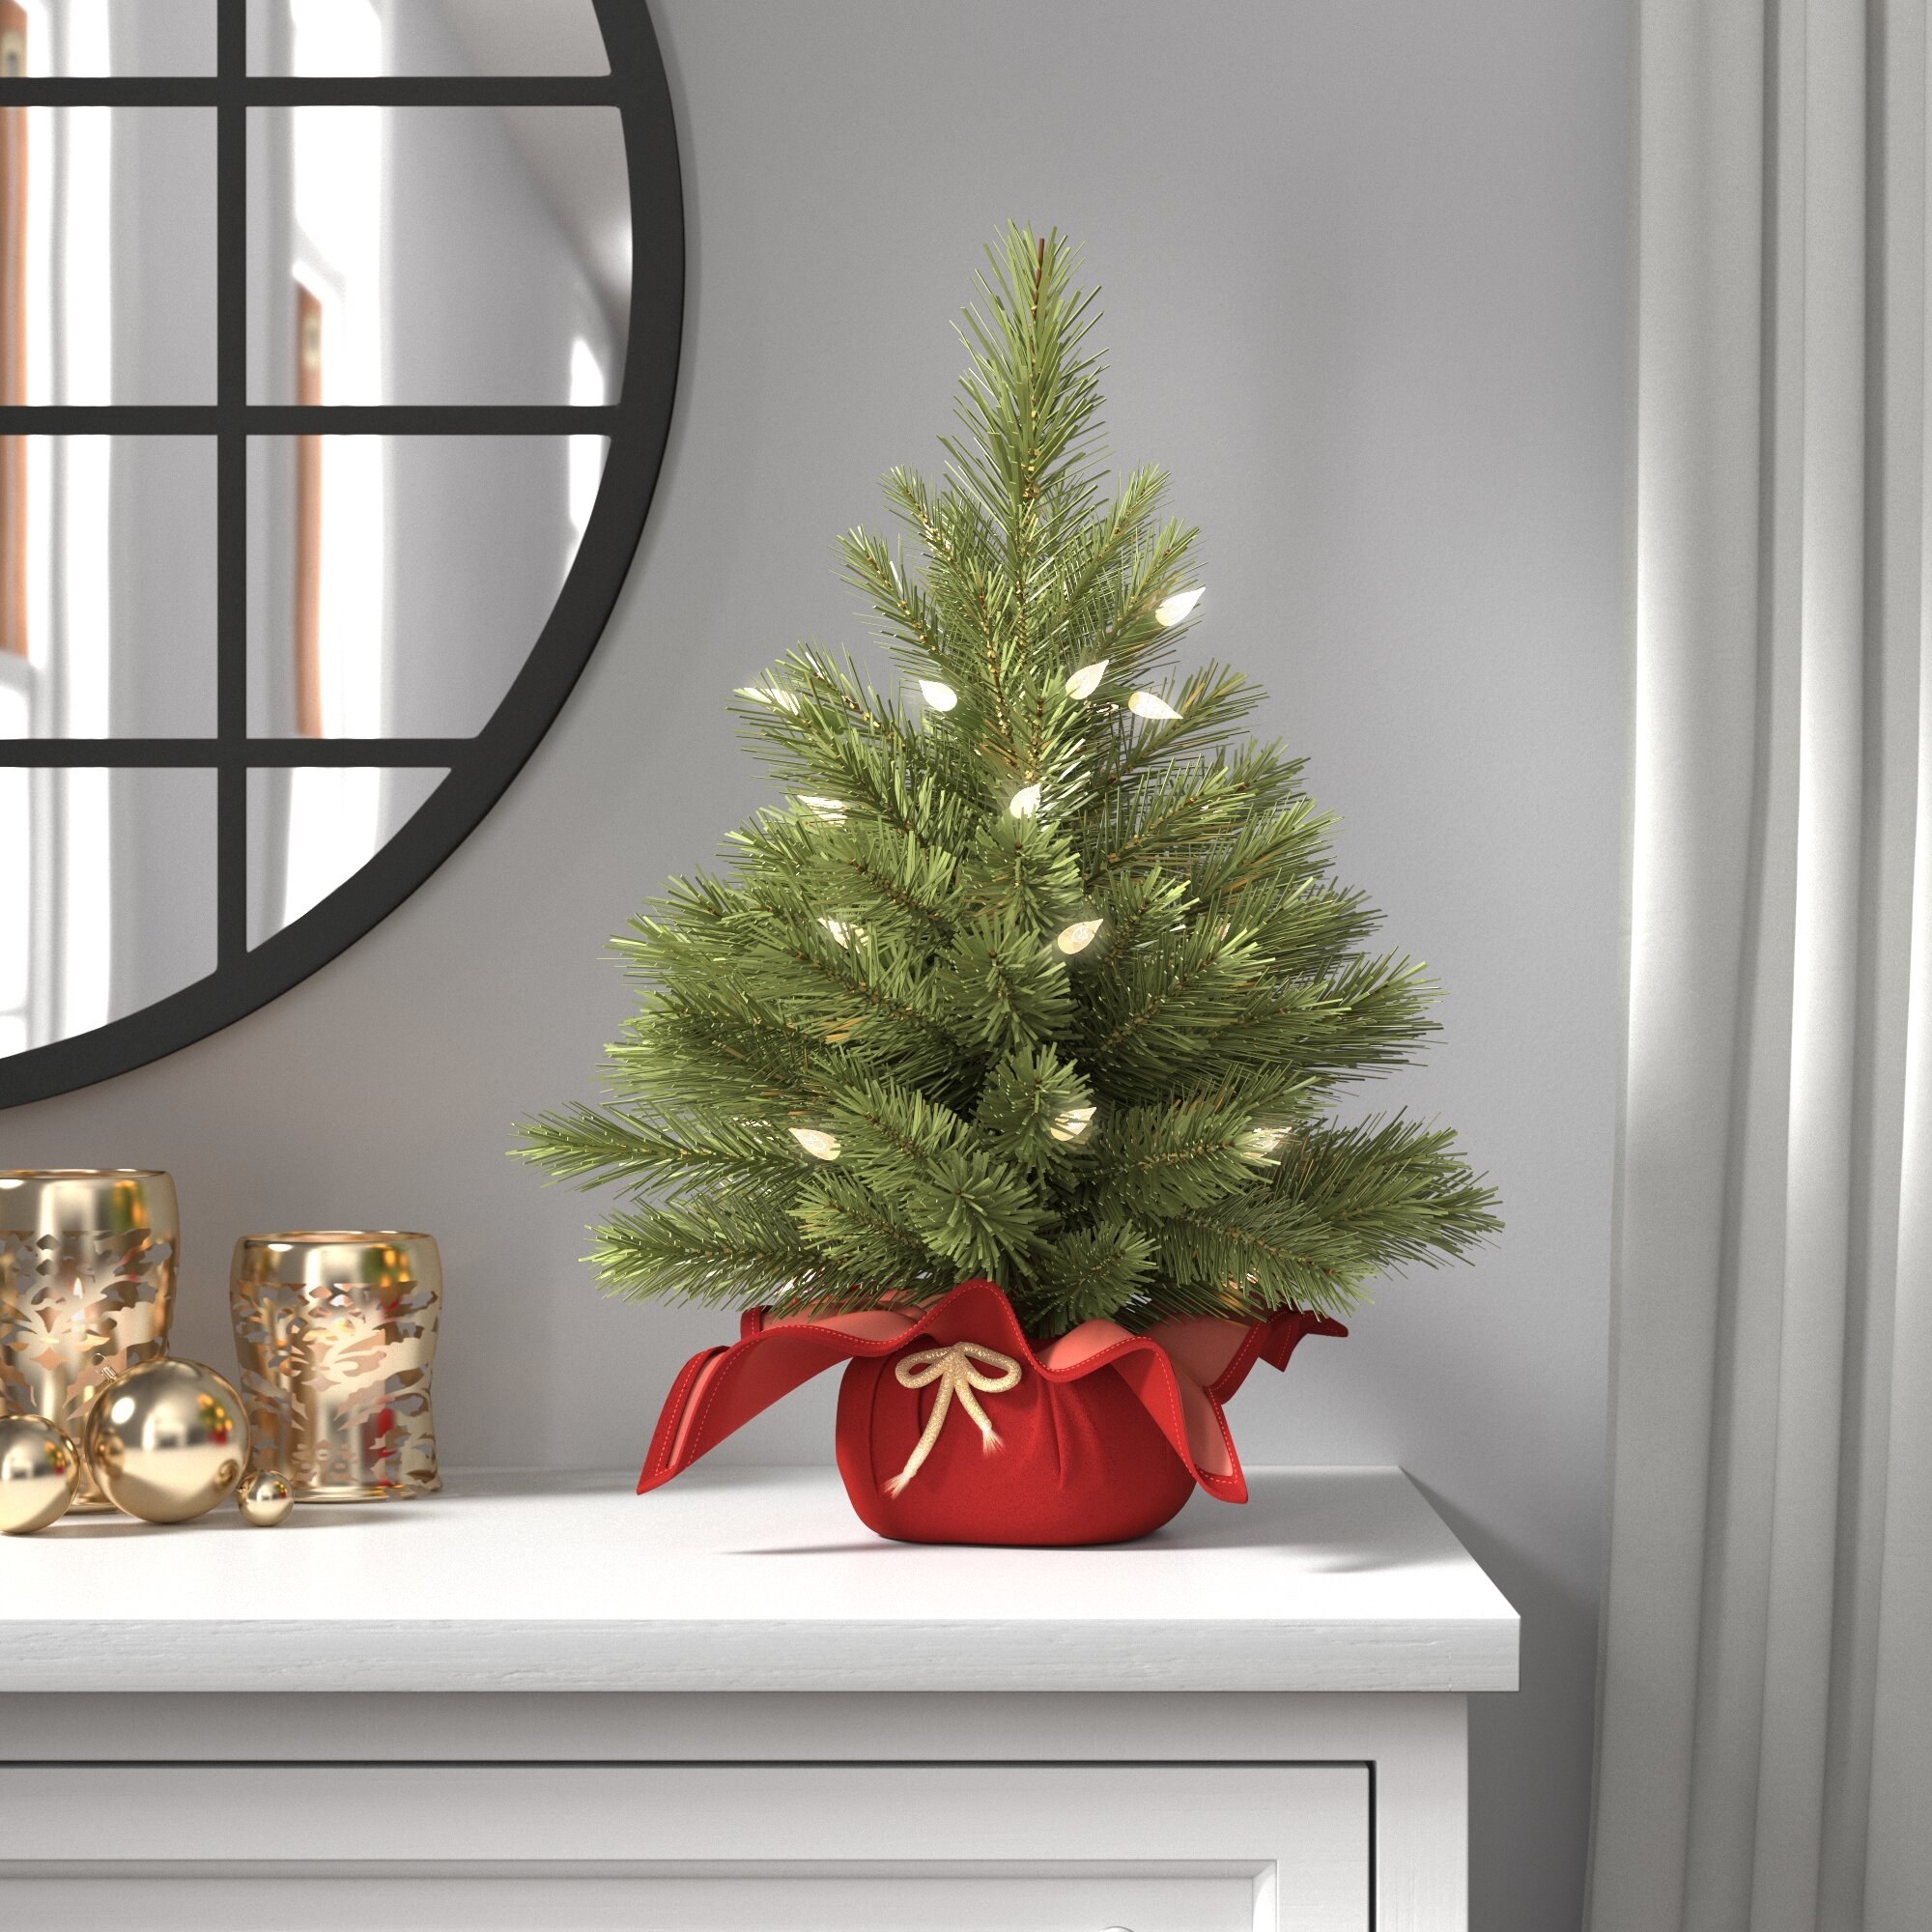 Mini tree on white countertop, with red bag base